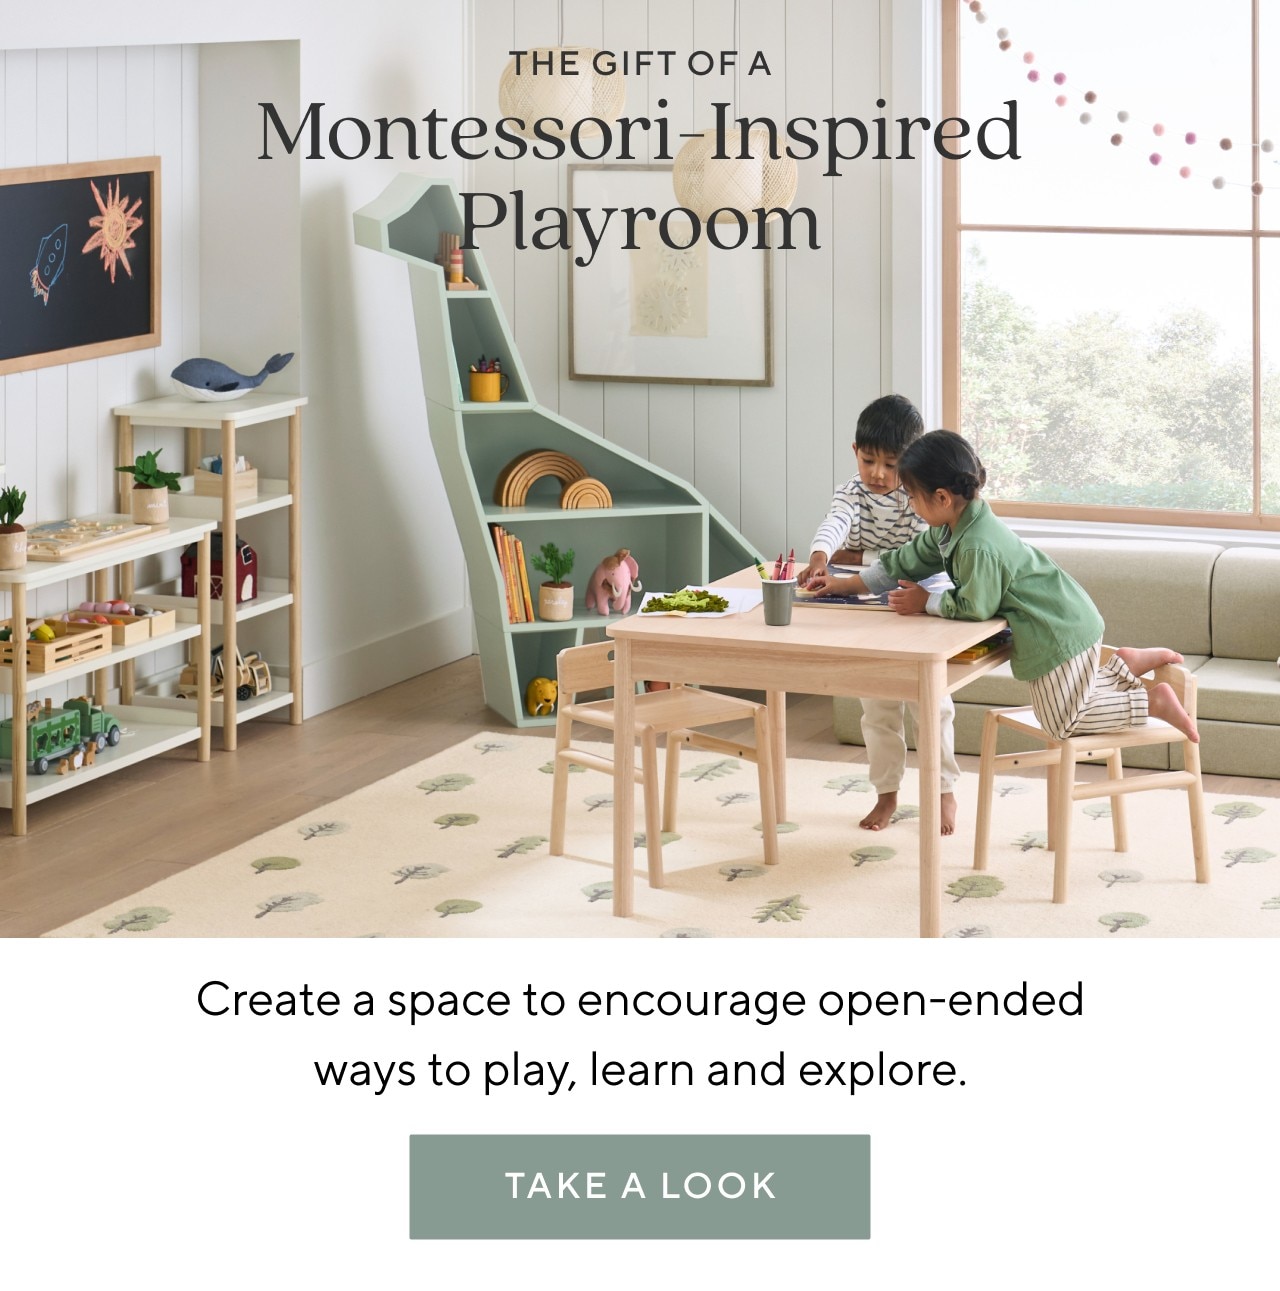 THE GIFT OF A MONTESSORI-INSPIRED PLAYROOM